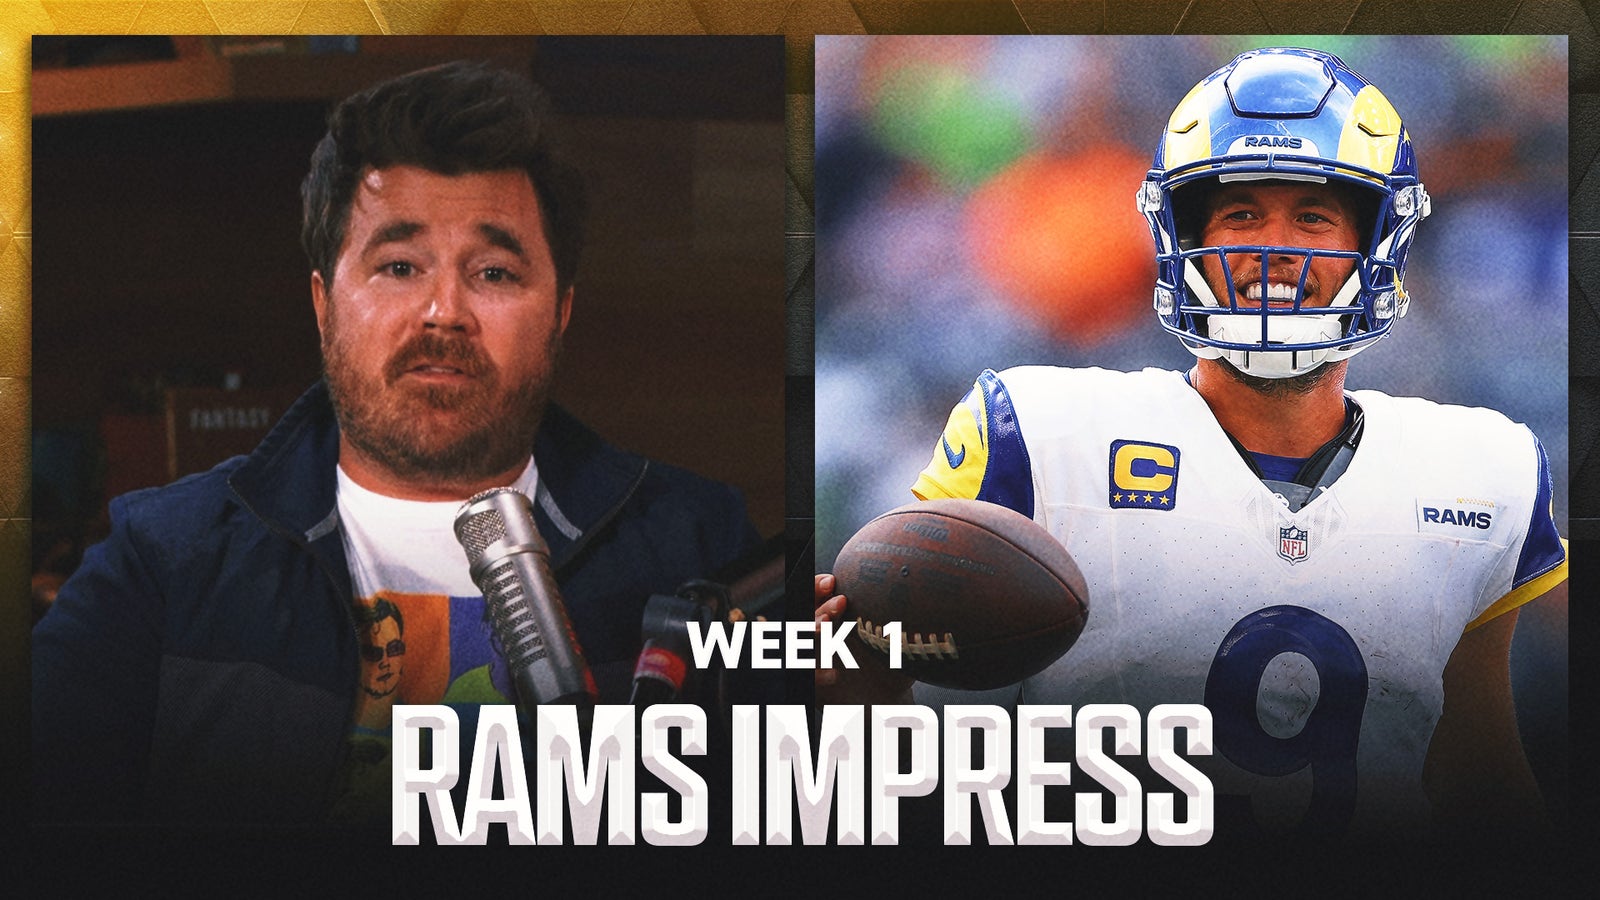 Dave Helman breaks down Matthew Stafford and the Rams' AMAZING win over the Seahawks